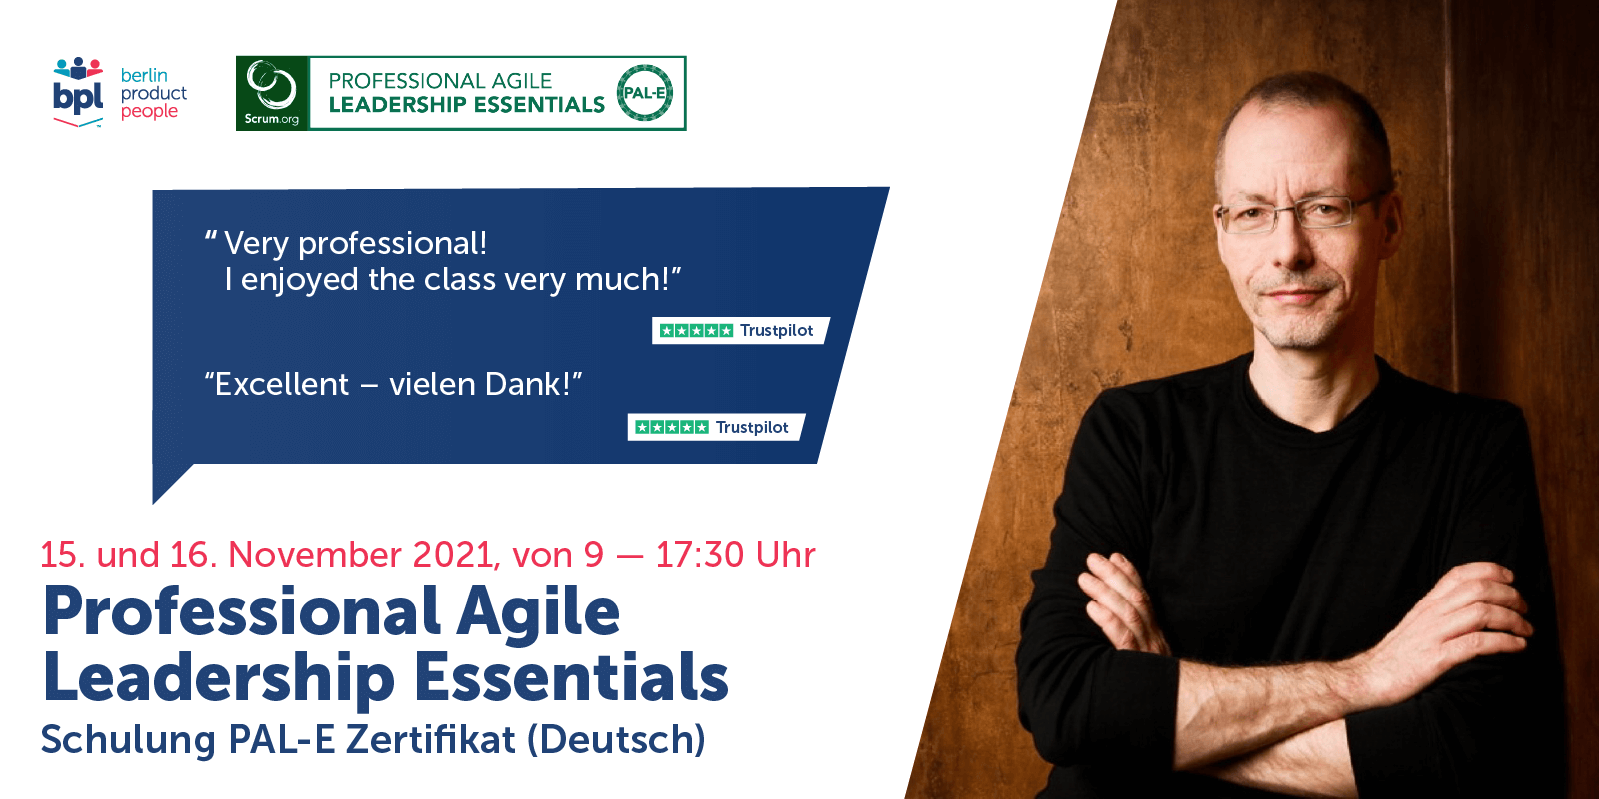 Professional Agile Leadership Essentials Schulung mit PAL-E Zertifikat November 2021 — Berlin Product People GmbH